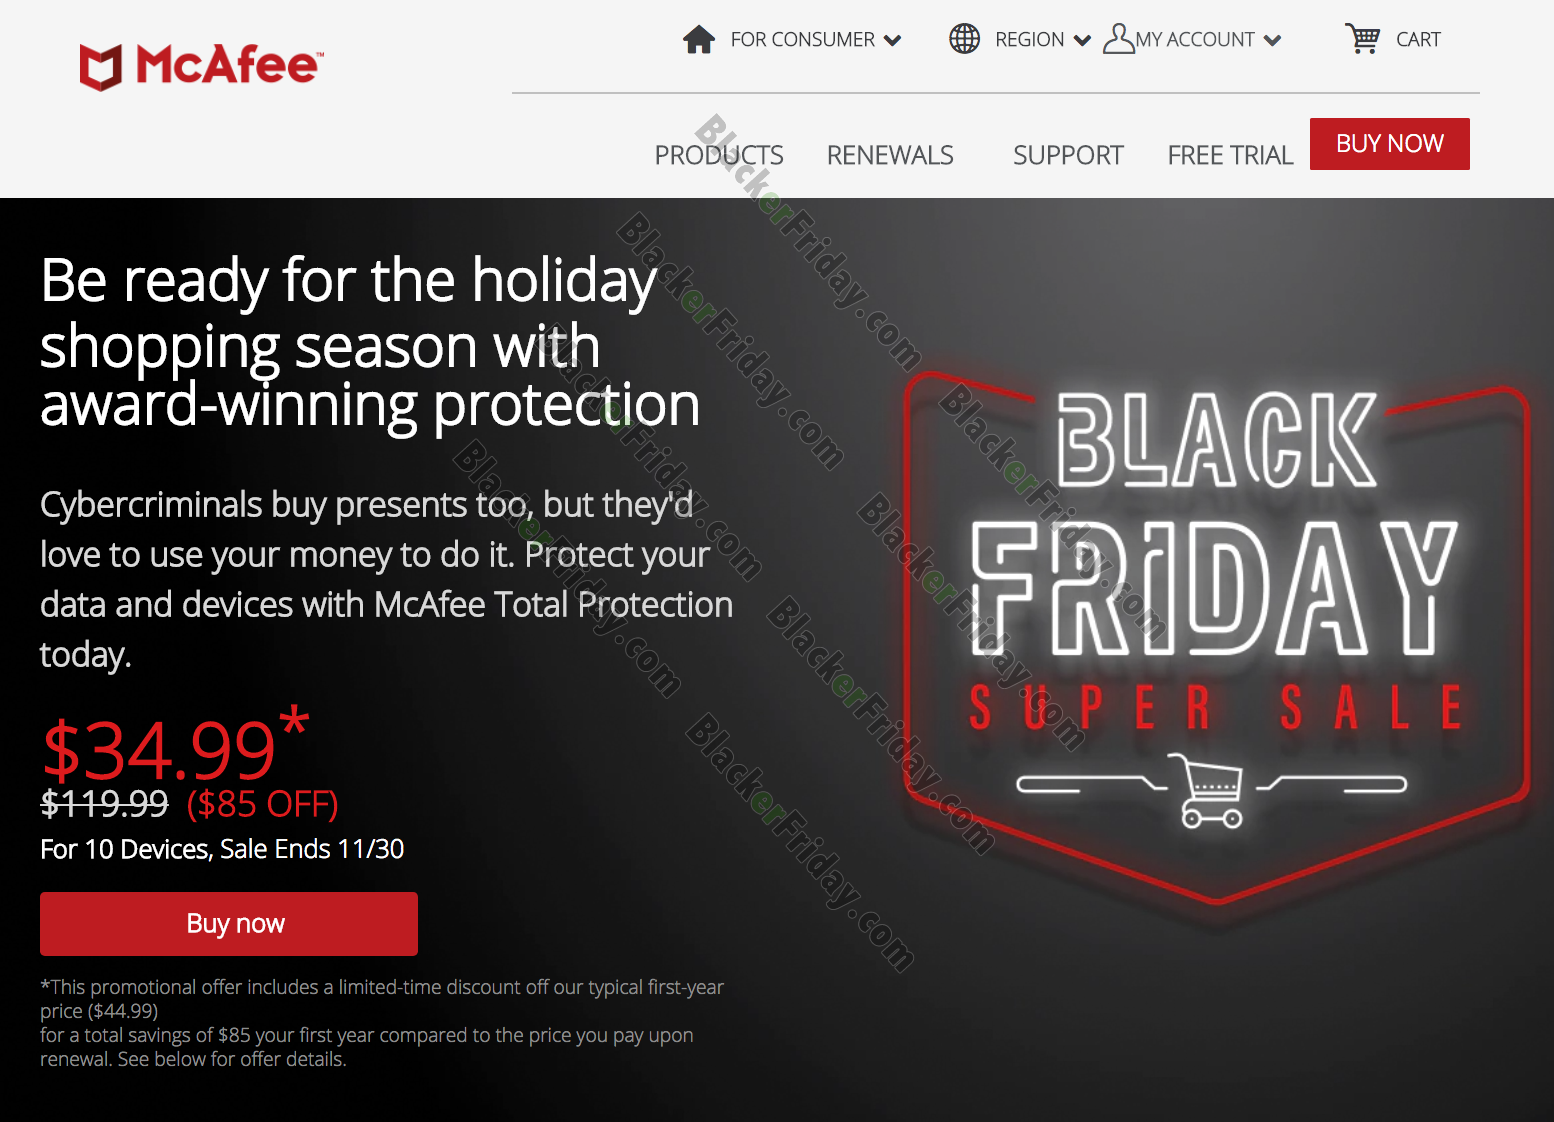 McAfee Black Friday 2021 Sale What to Expect Blacker Friday